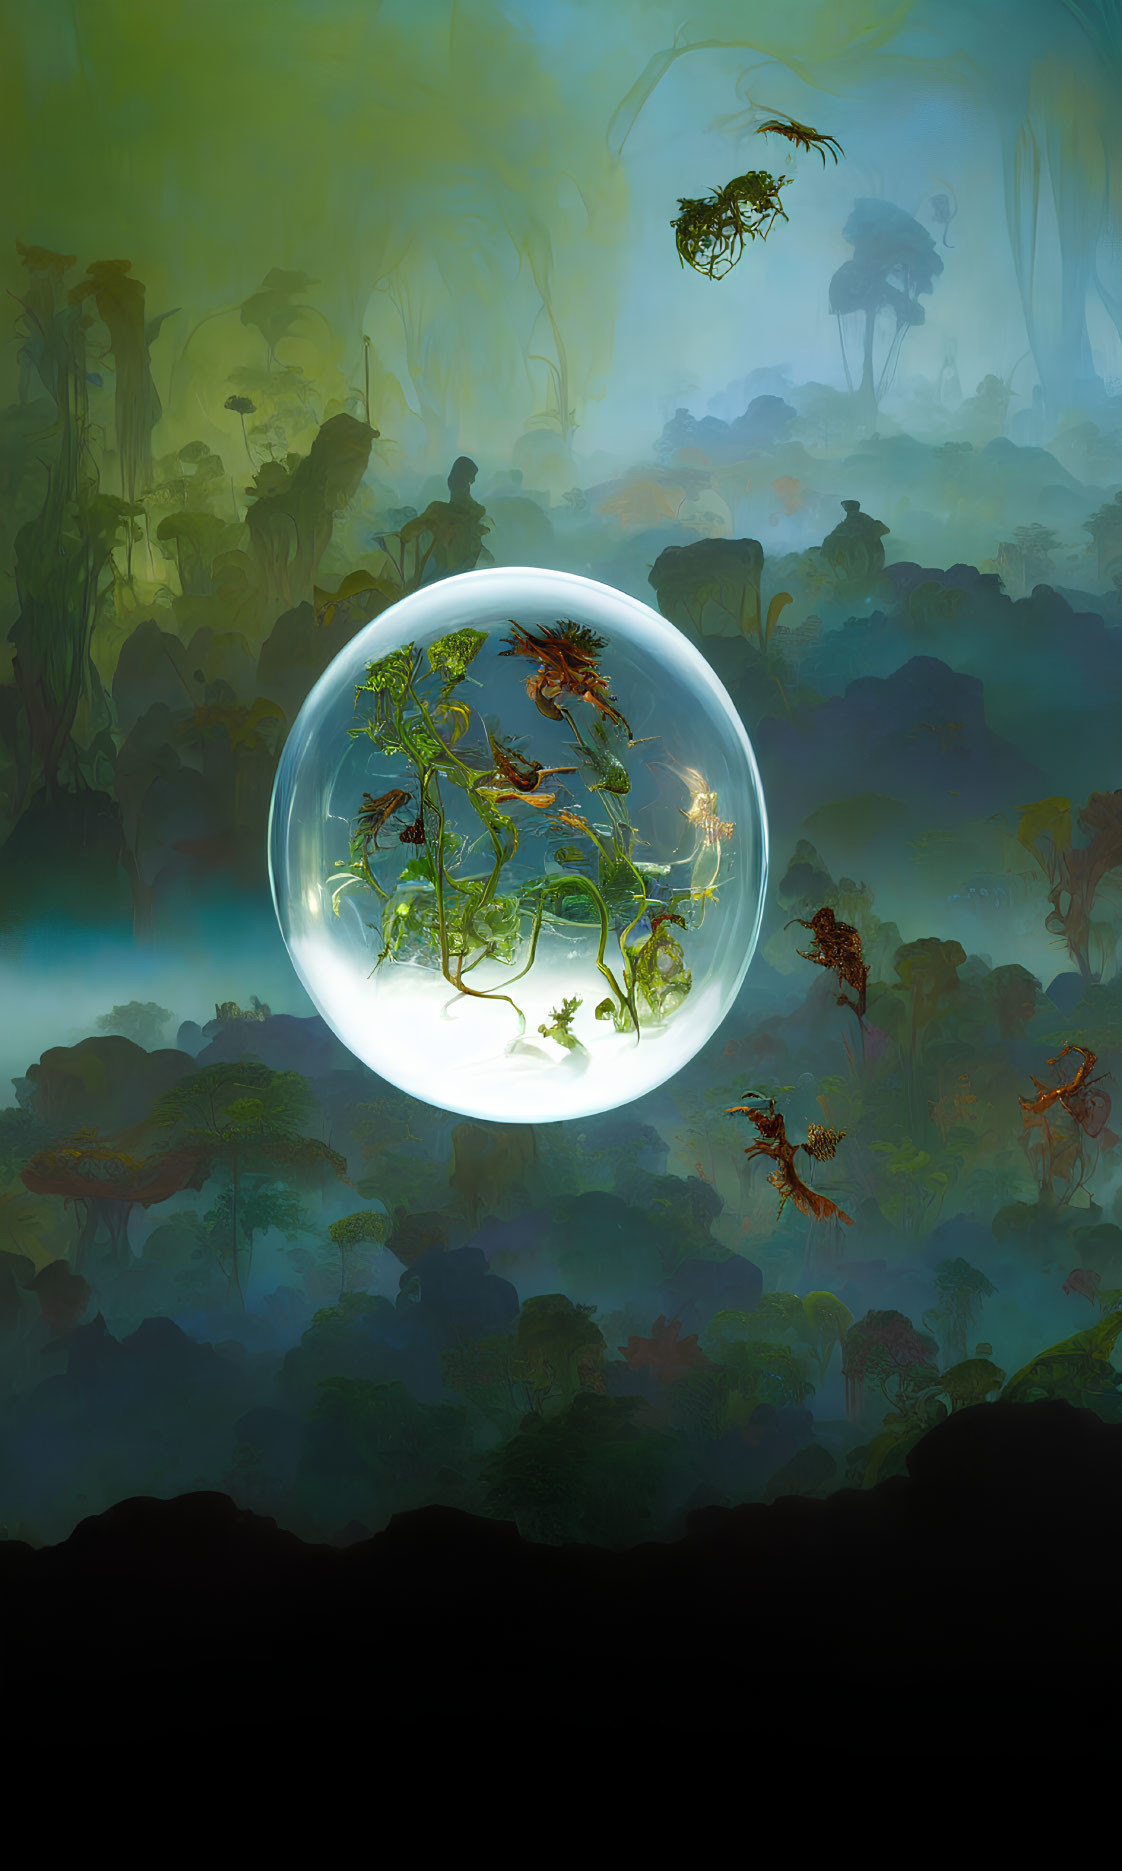 Illustration of glowing orb with vibrant plants above misty forest